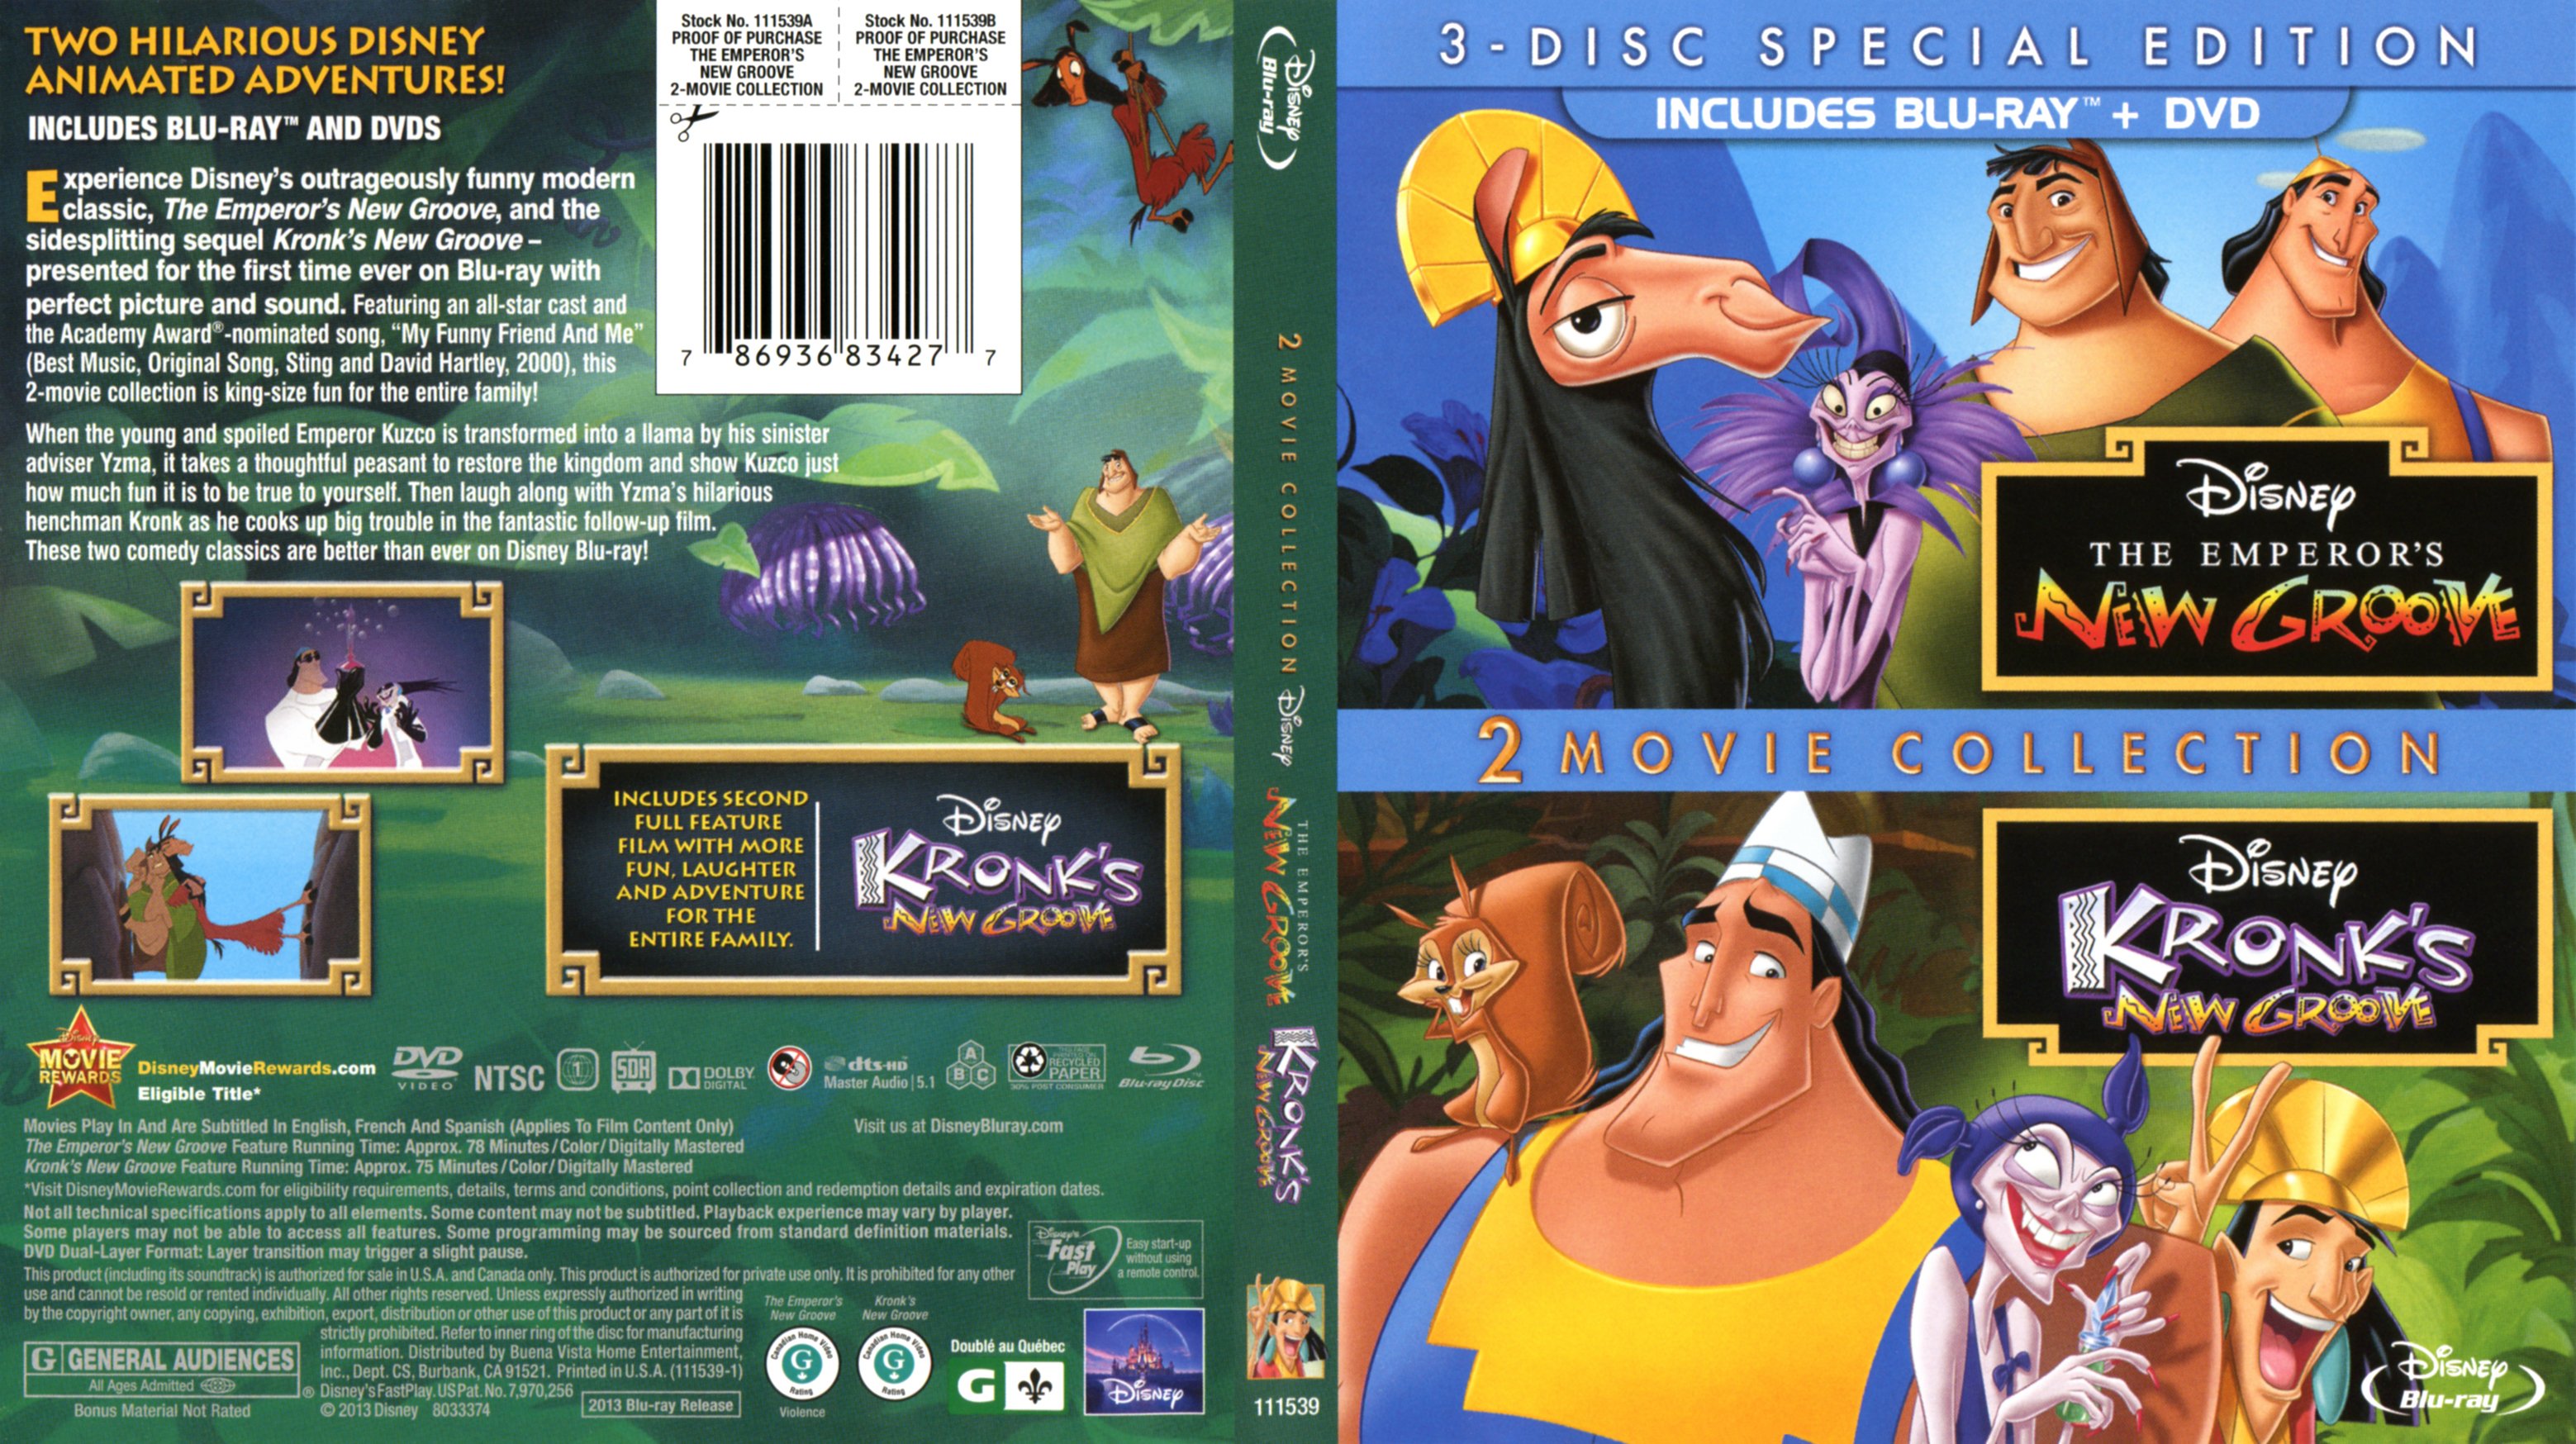 New Groove 2 Movie Collection 2000 2005 